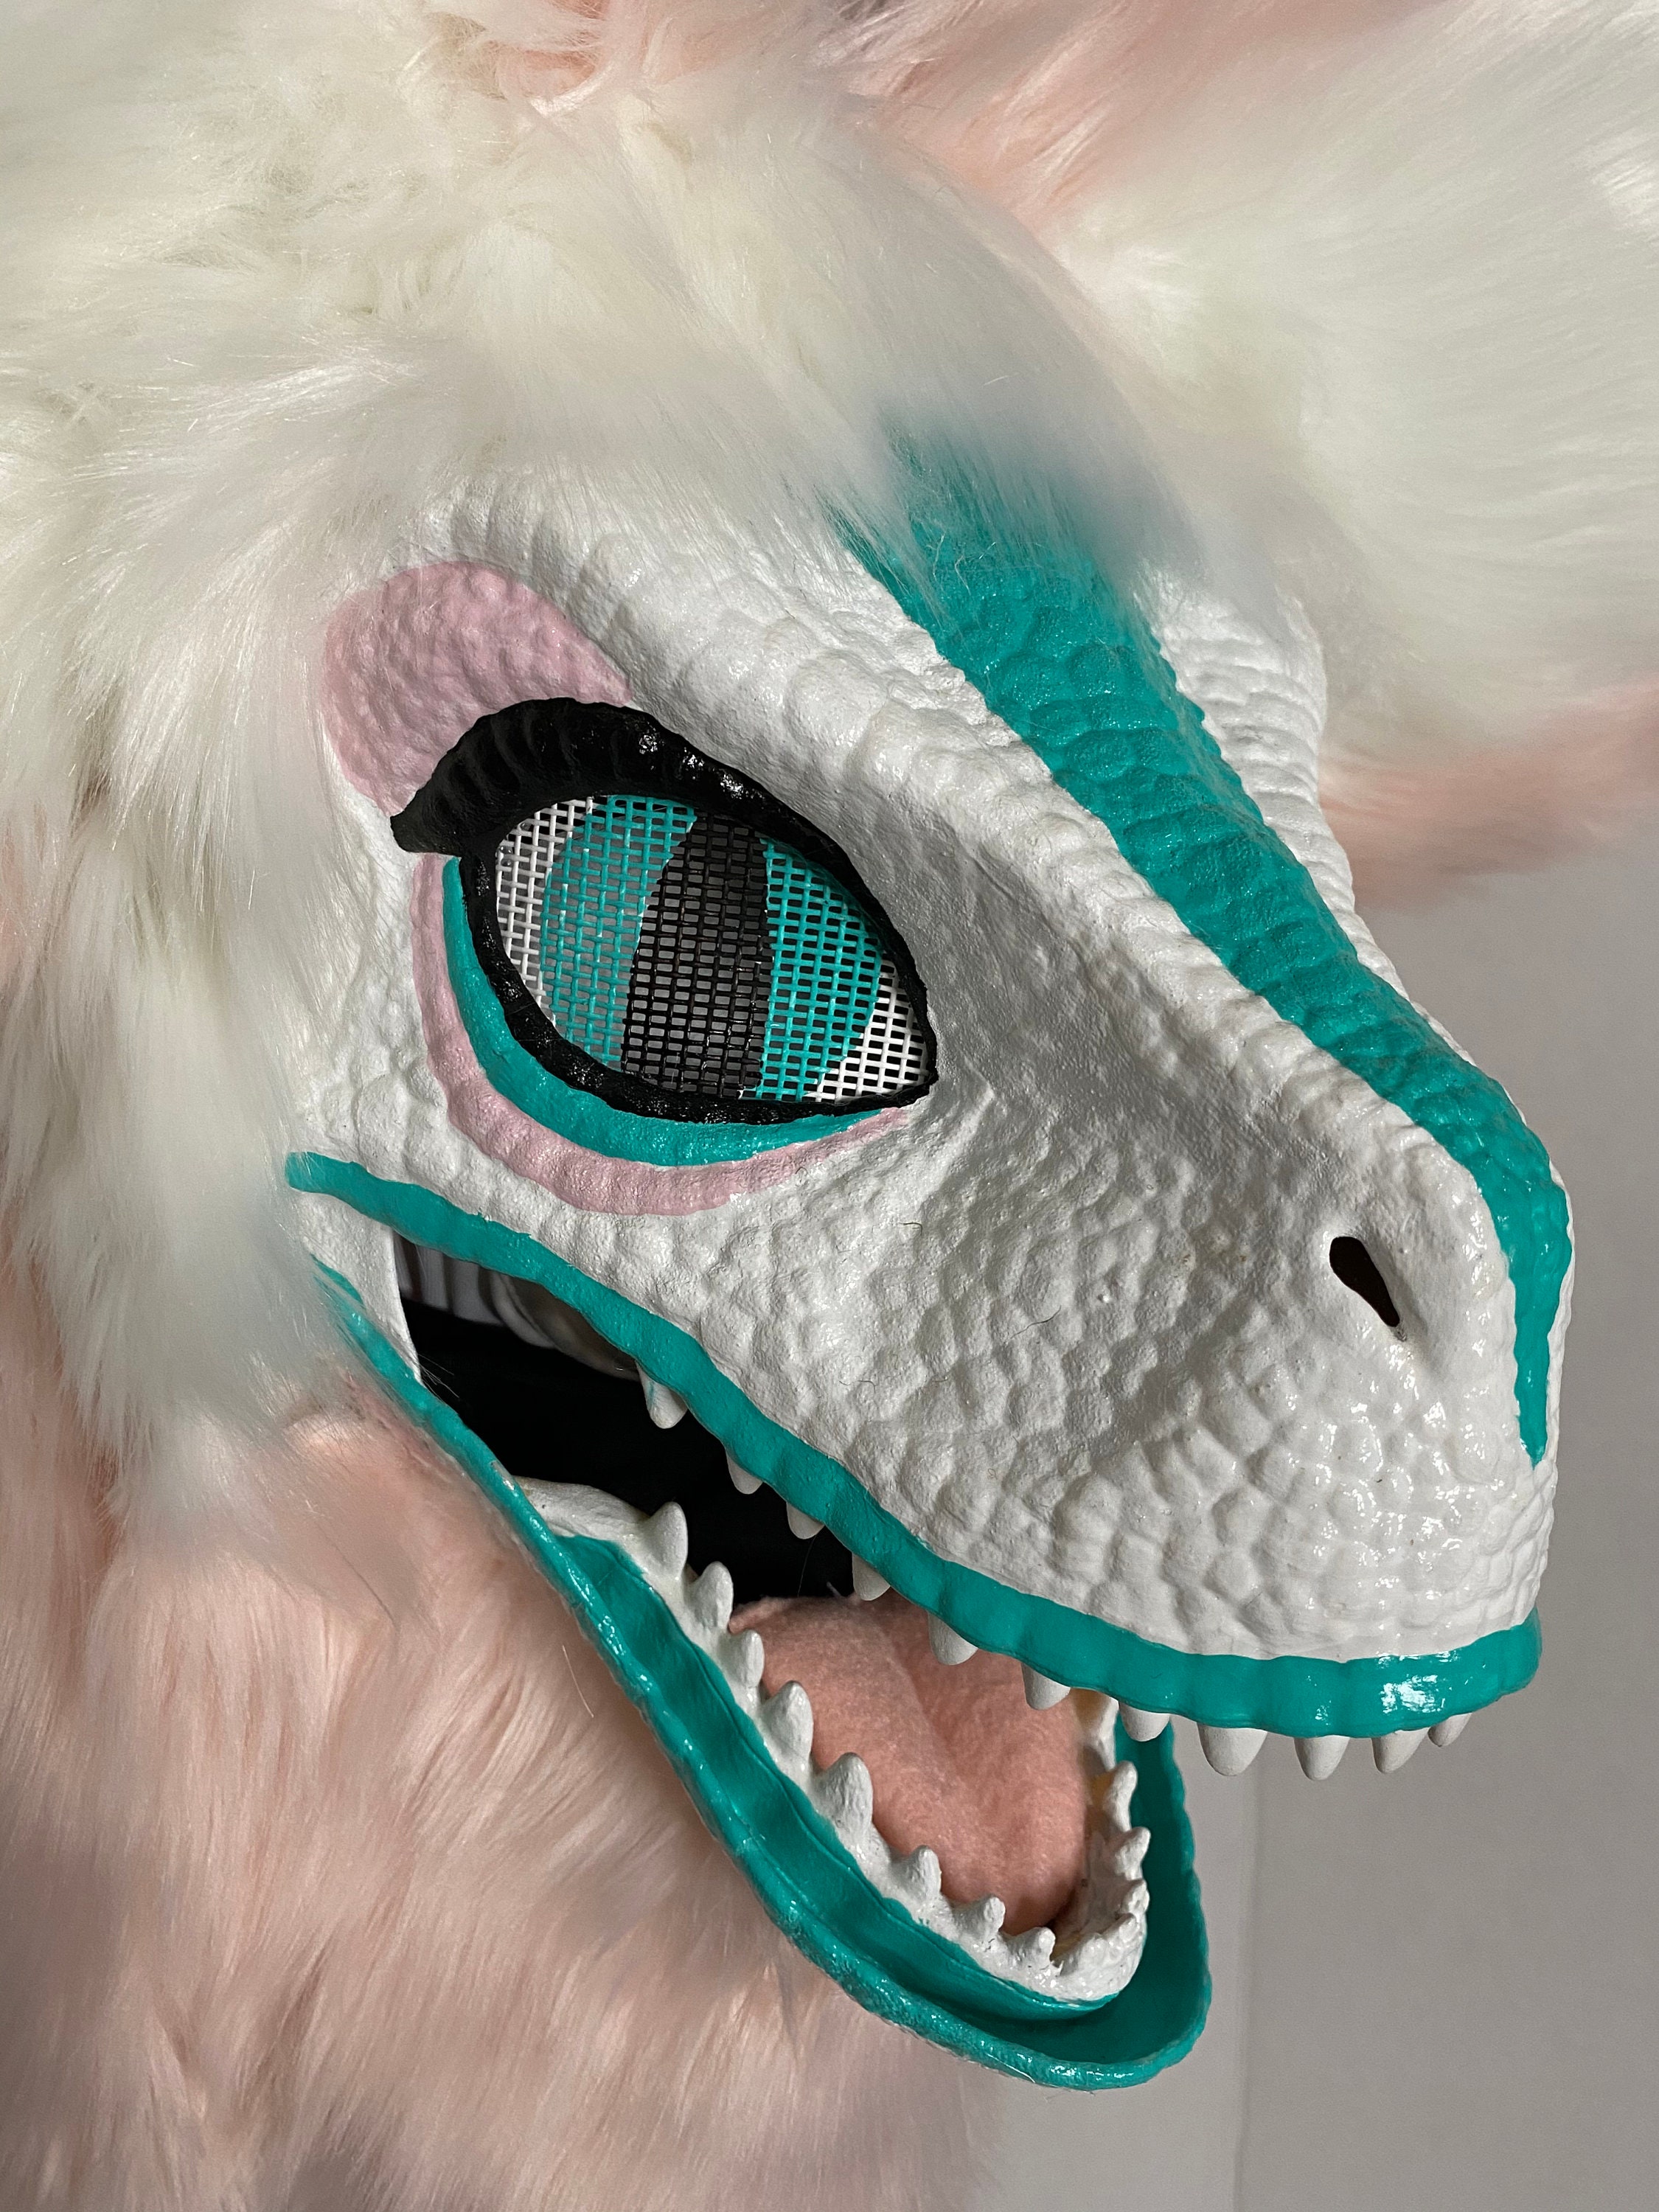 What You Need To Make A Dino Mask